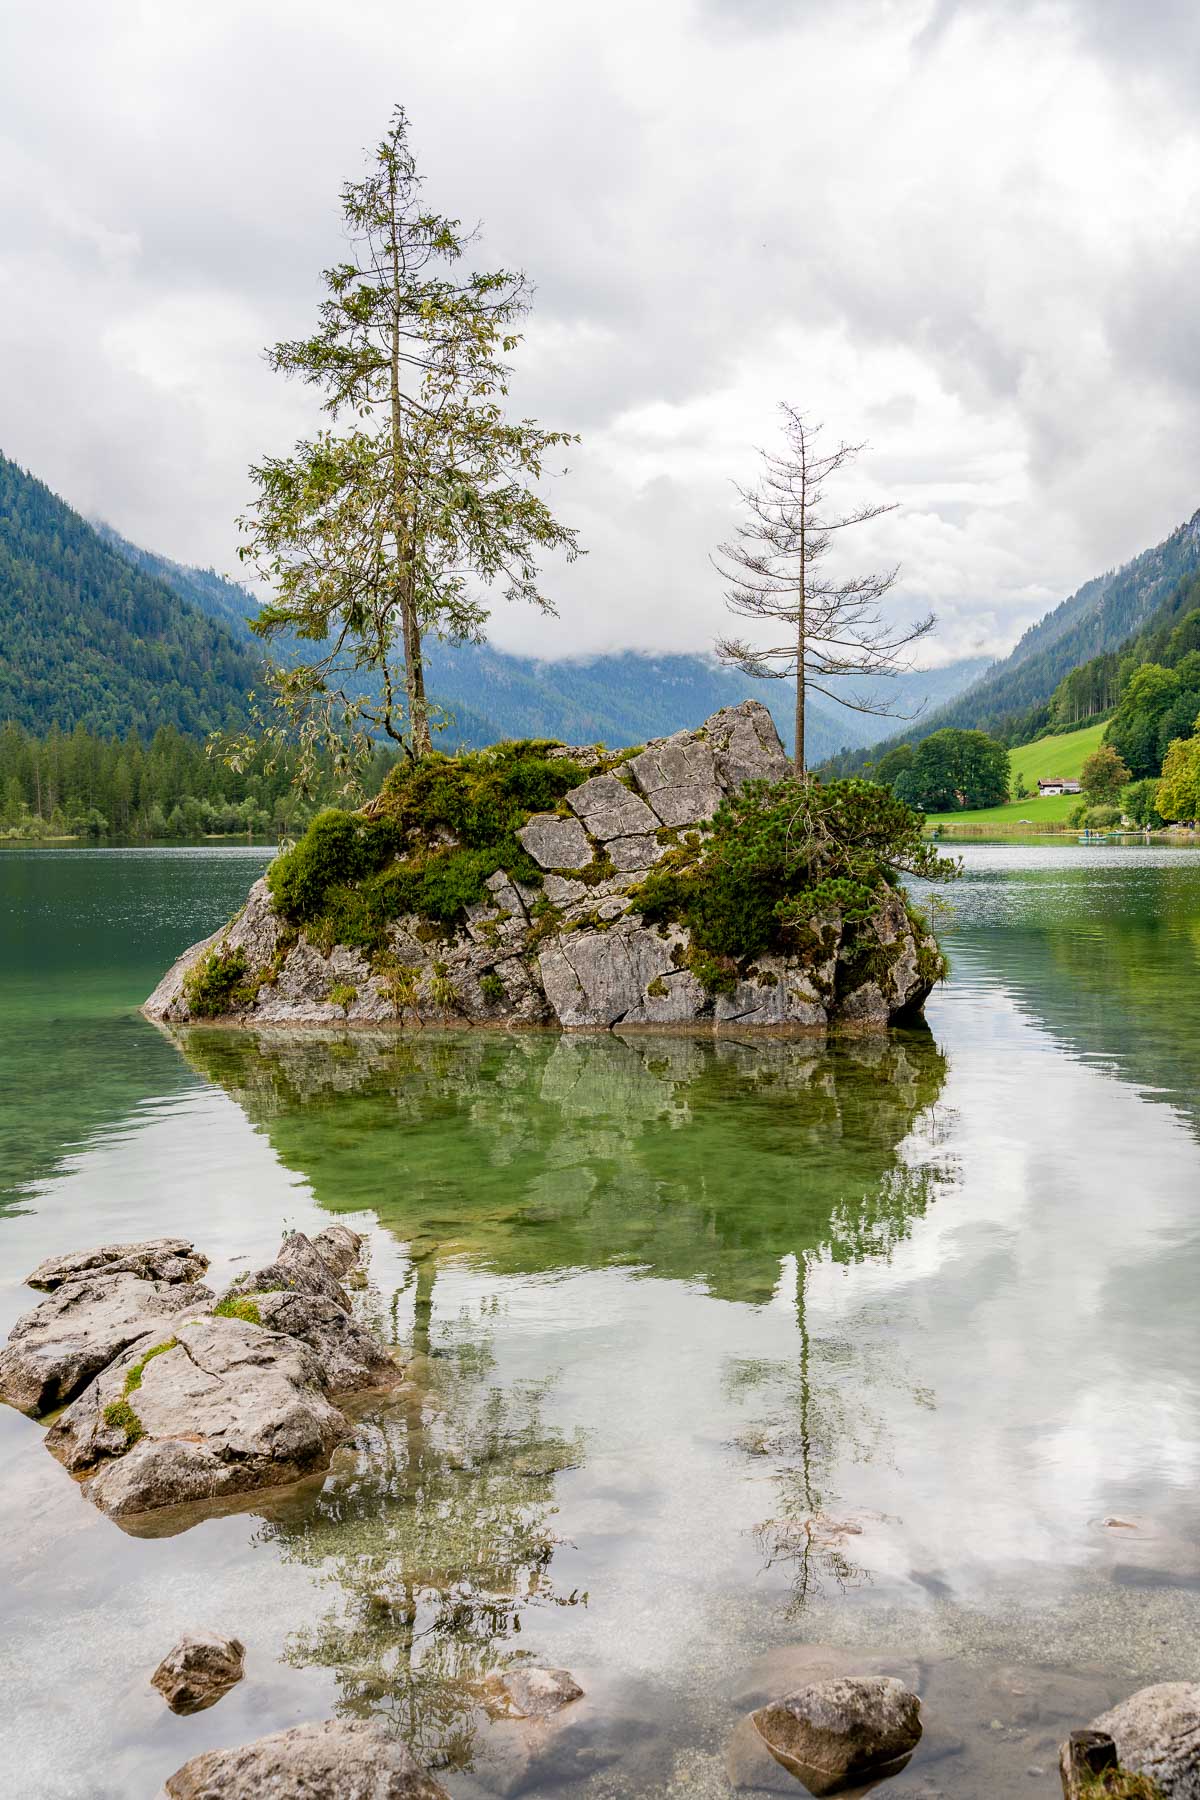 Rock island in the water at Hintersee, Germany